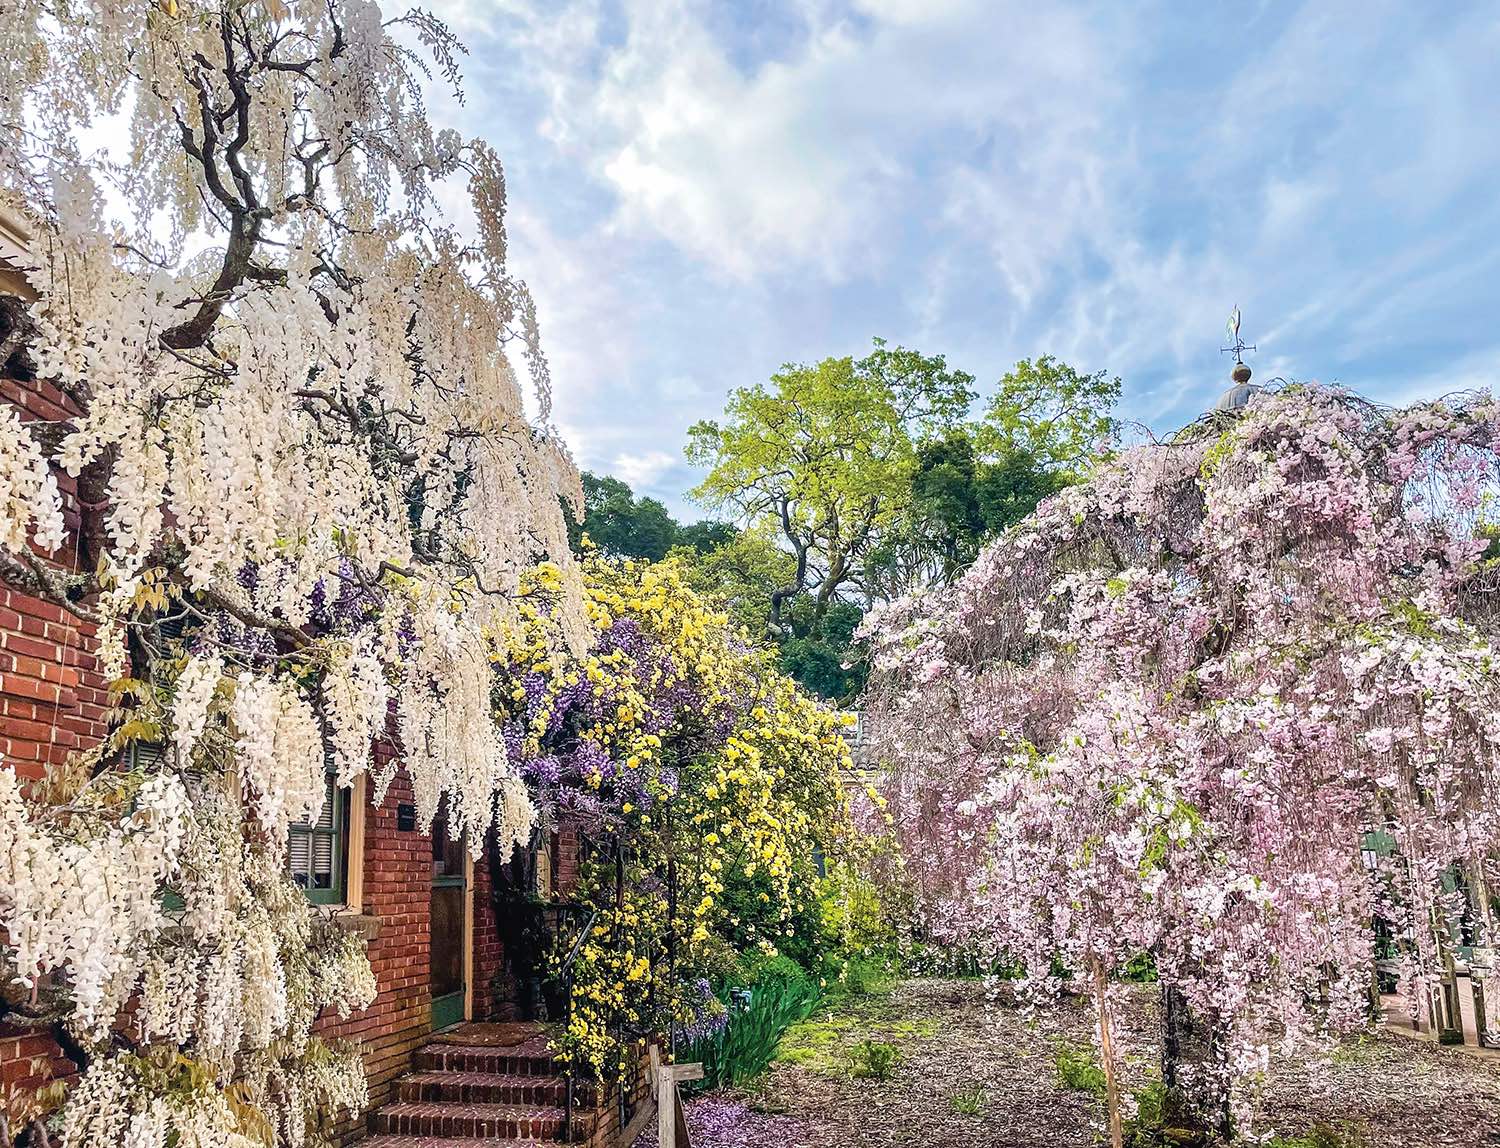 Multiple varieties of wisteria drape and bow along walls and walkways.